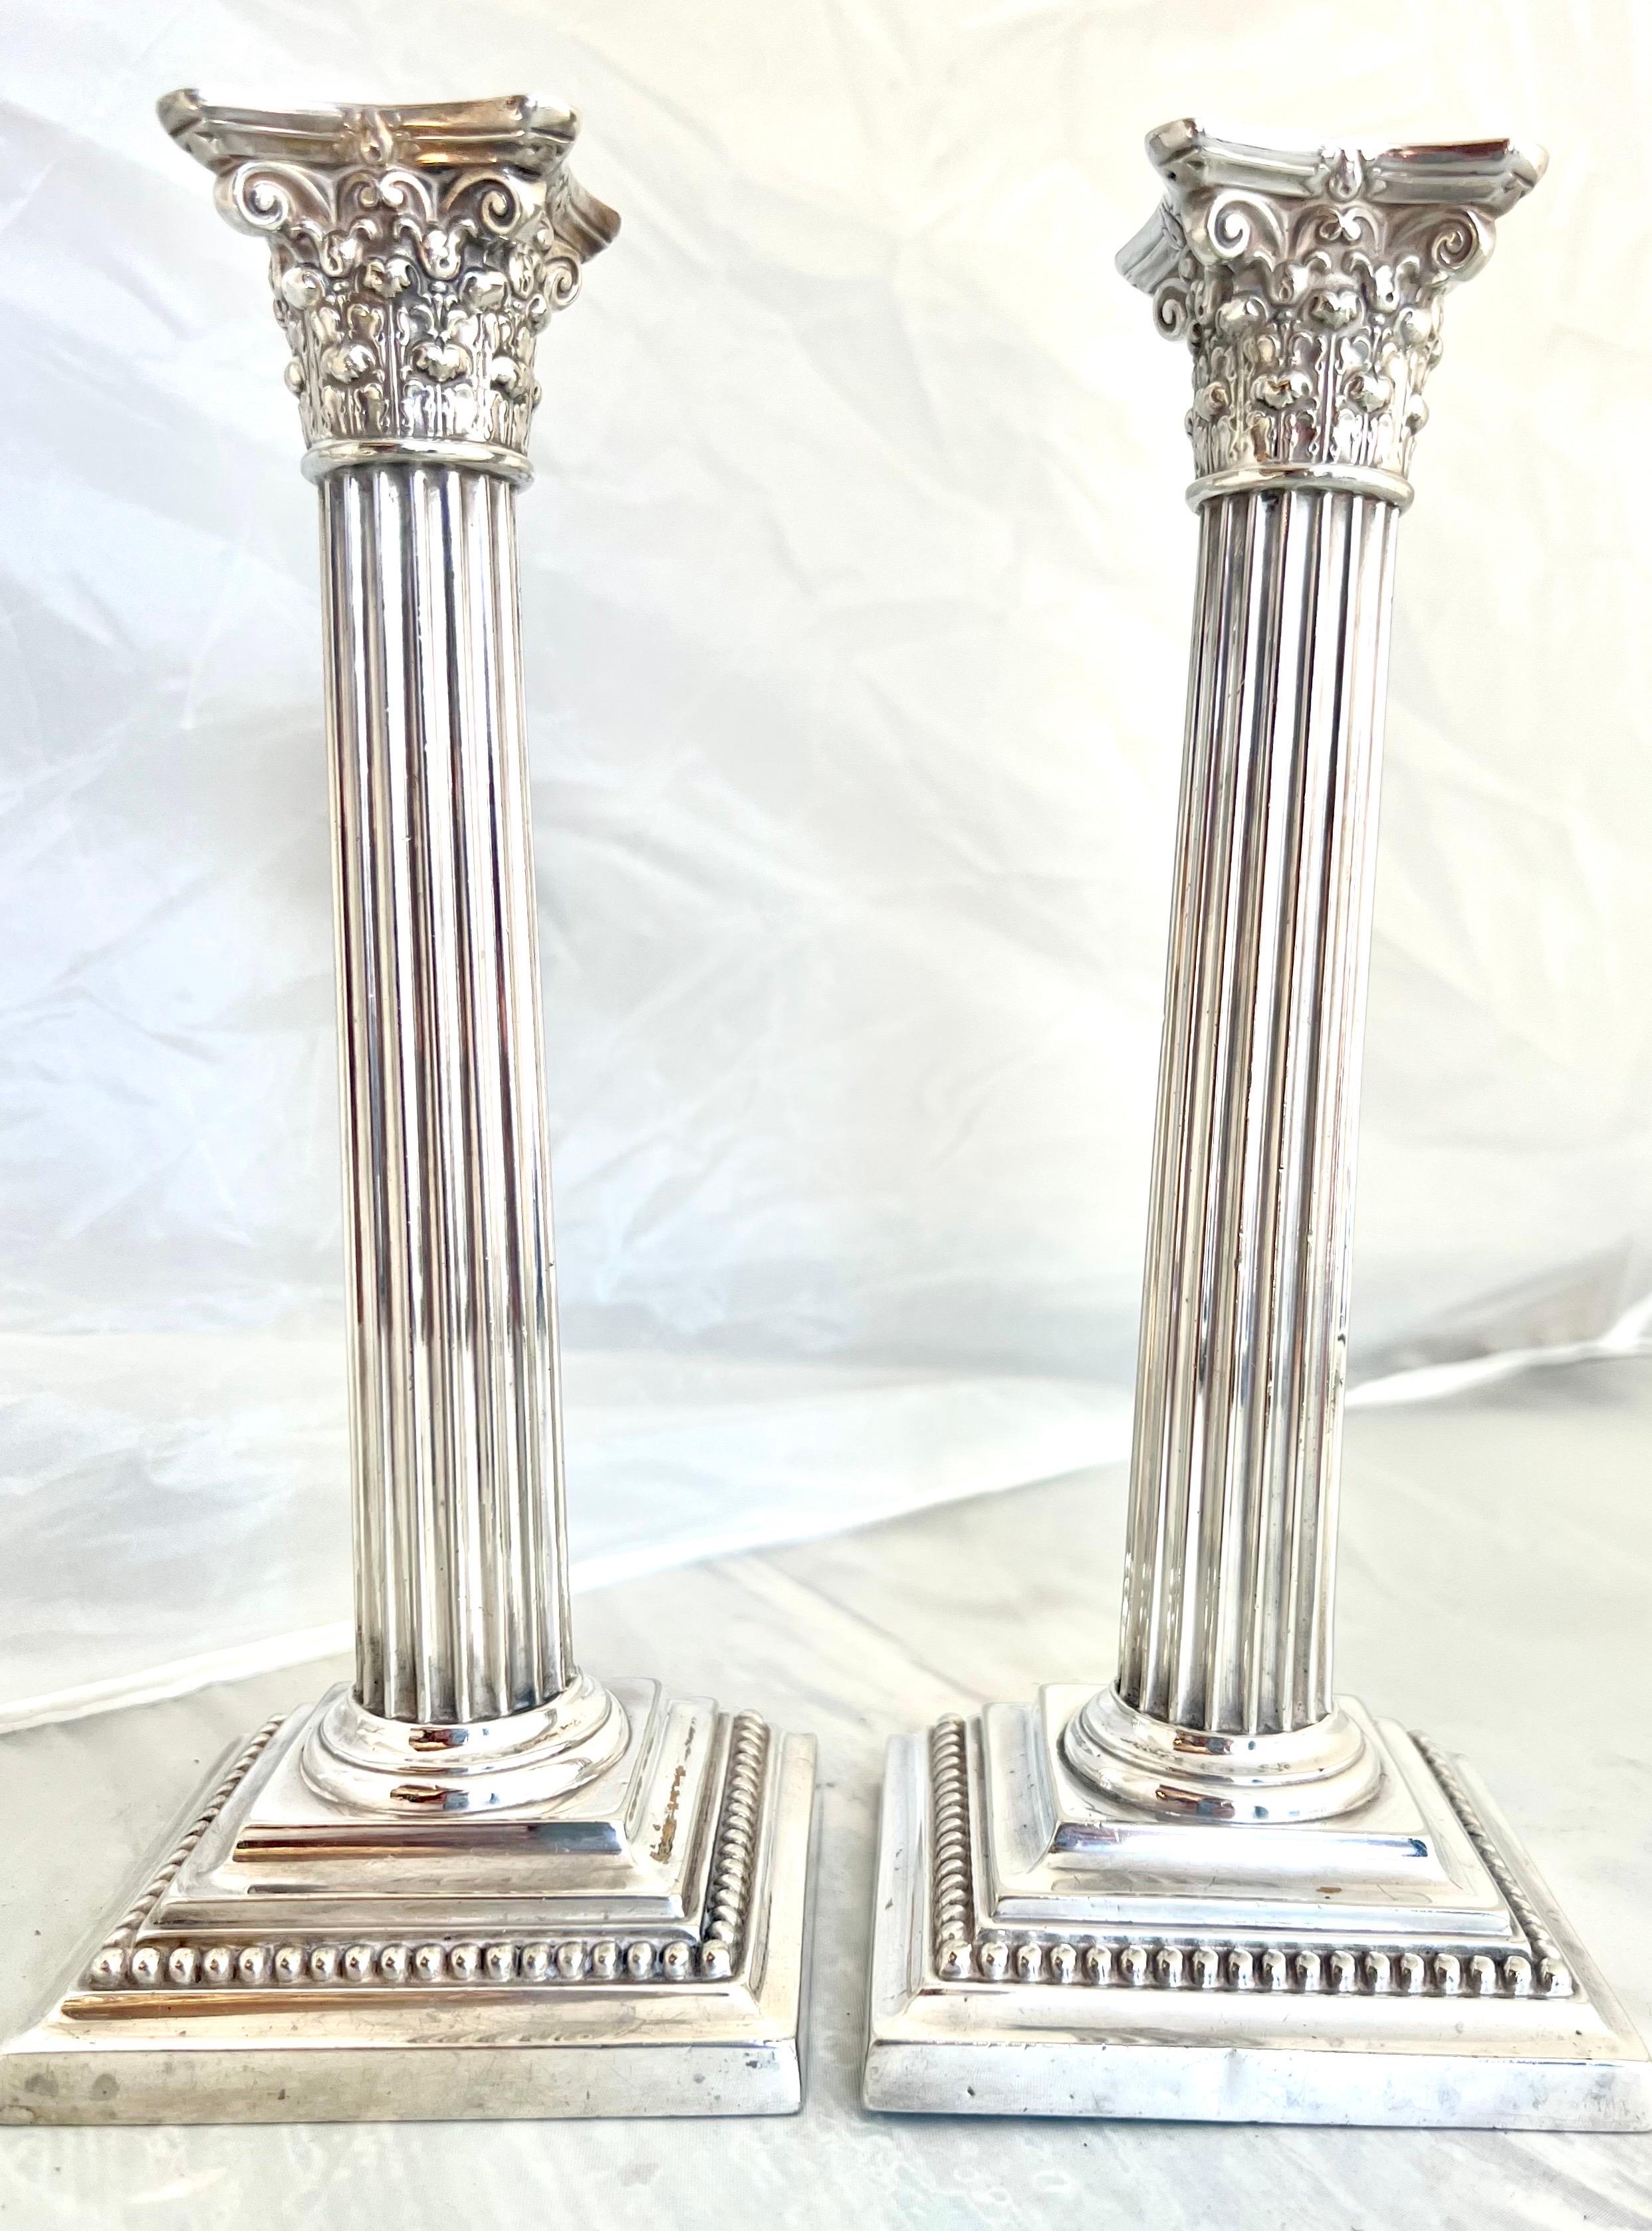 The pair of Gorham silver plate candlesticks shaped like columns with Corinthian capitals and removable tops, featuring fine beaded detail, exemplify the craftsmanship and attention to detail characteristic of Gorham pieces.  The Corinthian capitals